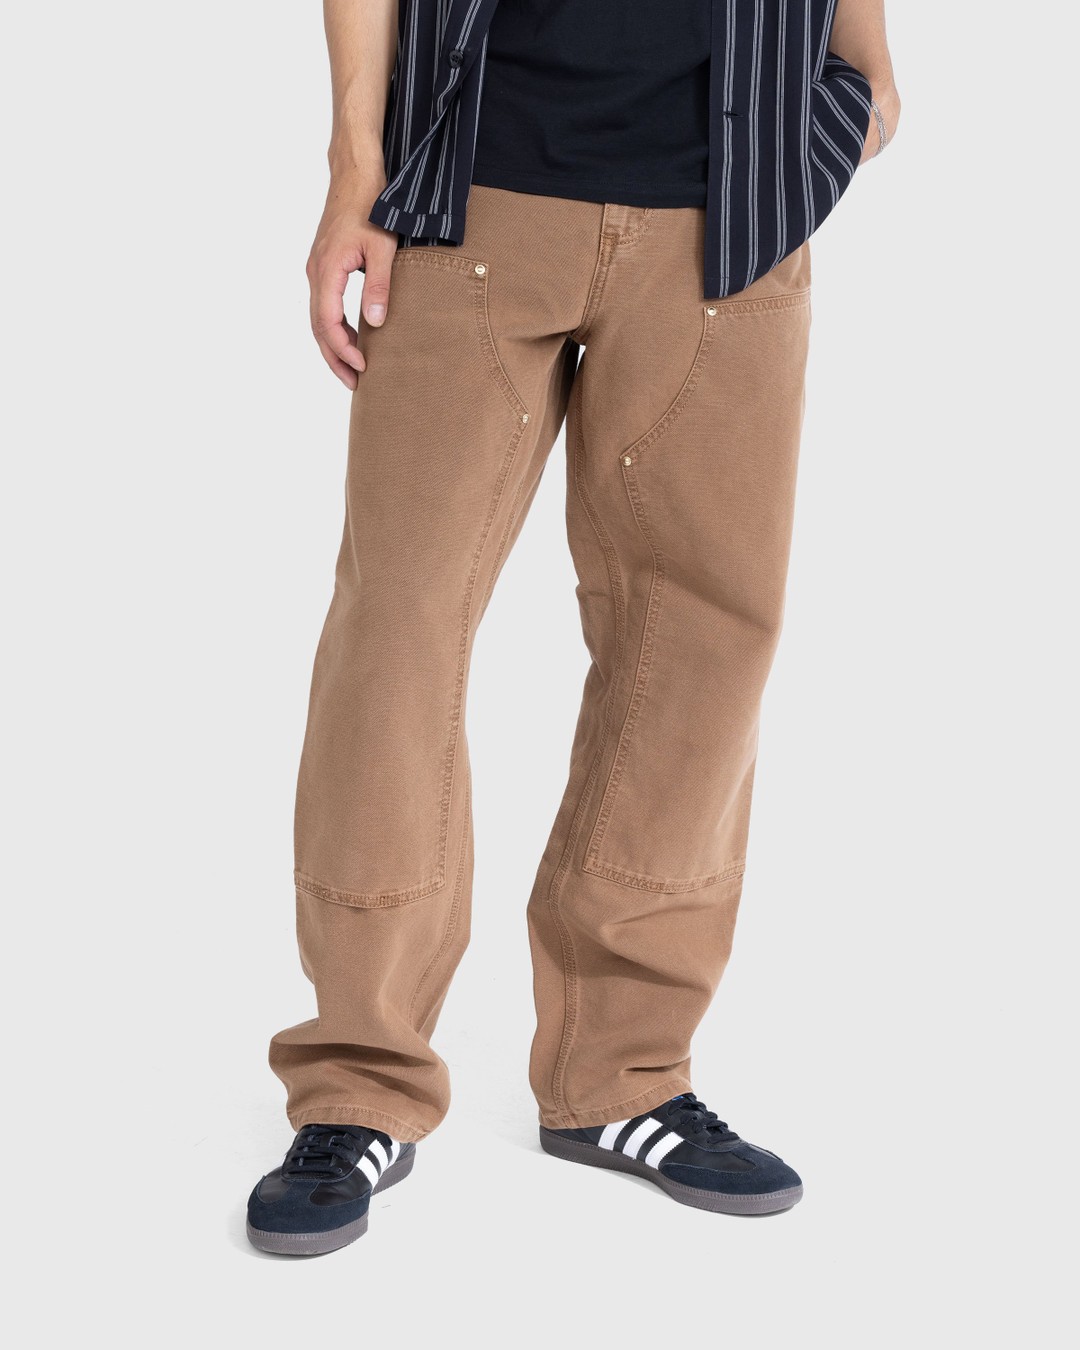 Carhartt WIP – Double Knee Pant Red